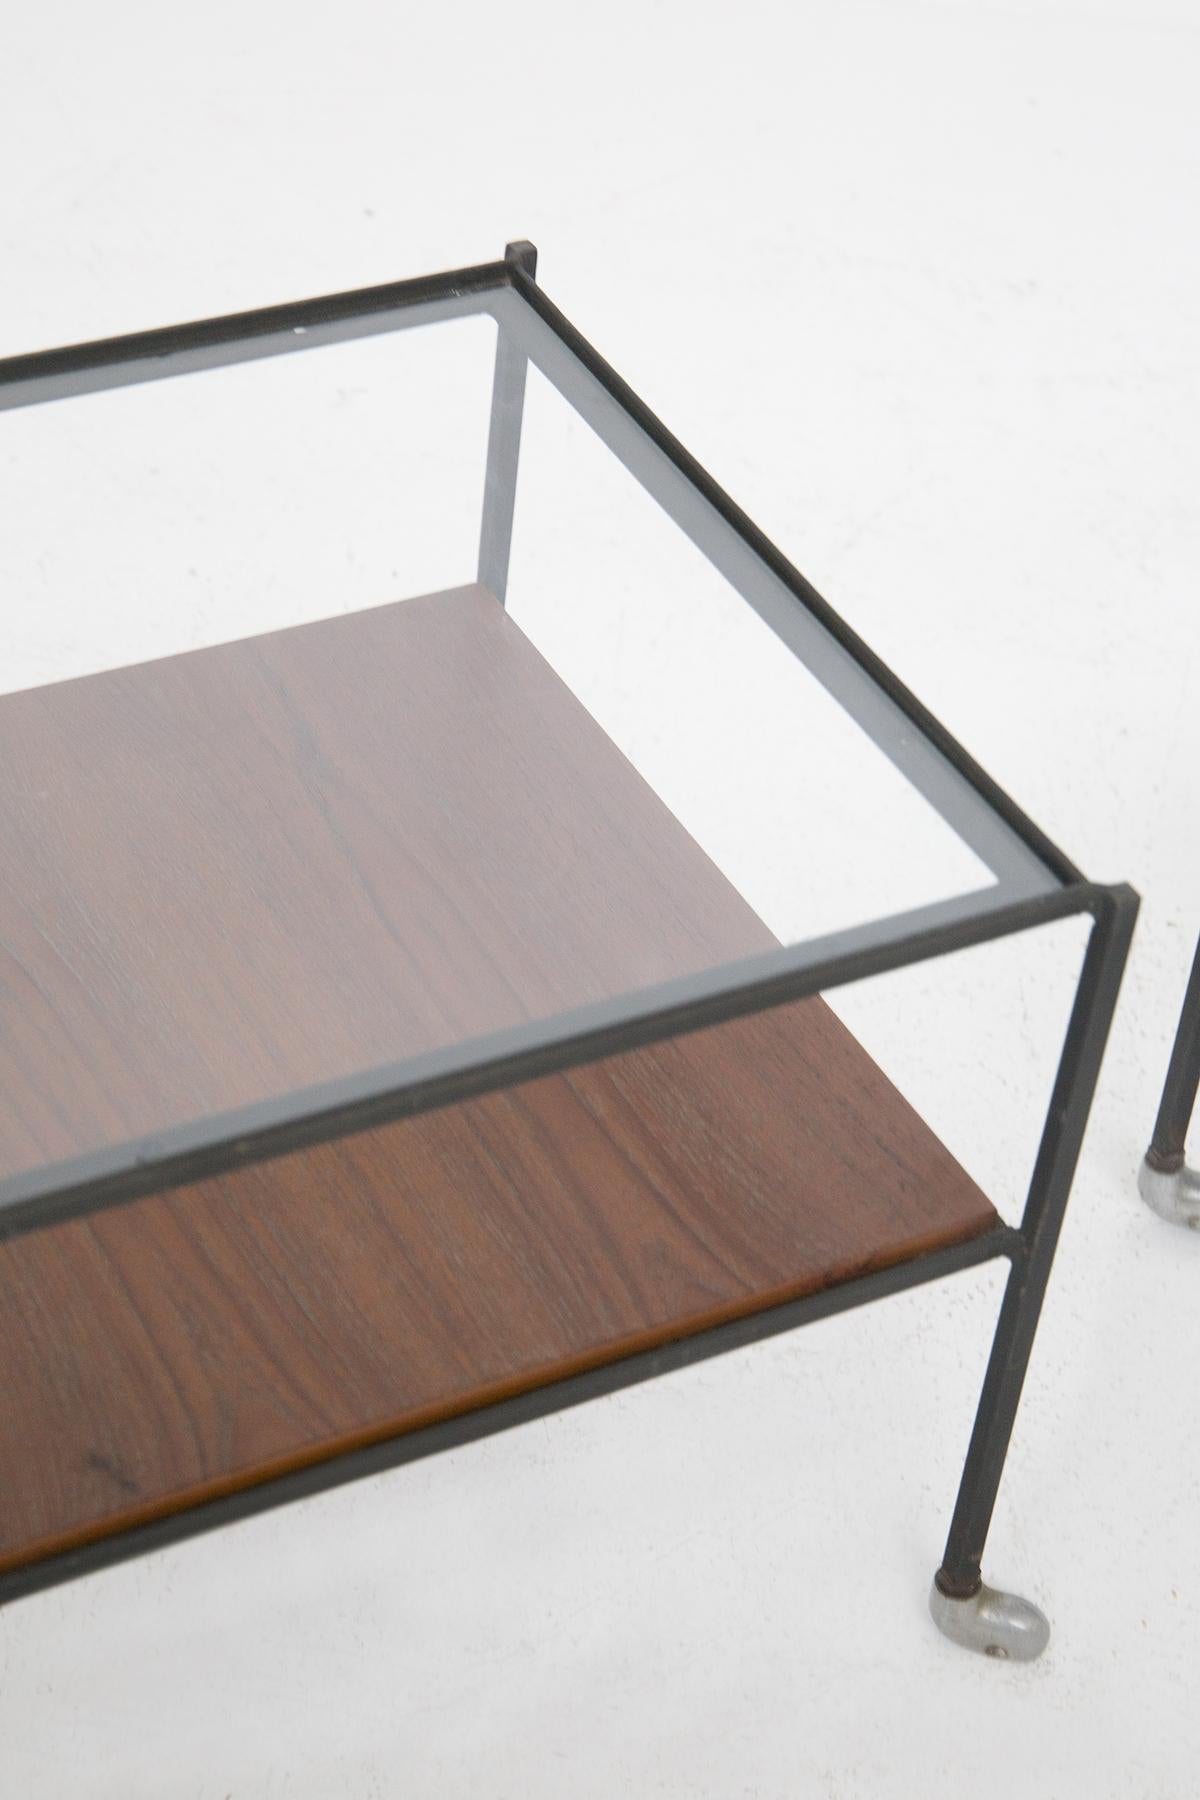 Wonderful pair of coffee tables for living room made in the 50's of fine Italian manufacture, produced by Azucena.
The pair of coffee tables has the structure totally made of wood, beautifully interlocked with the fabulous glass top, which gives